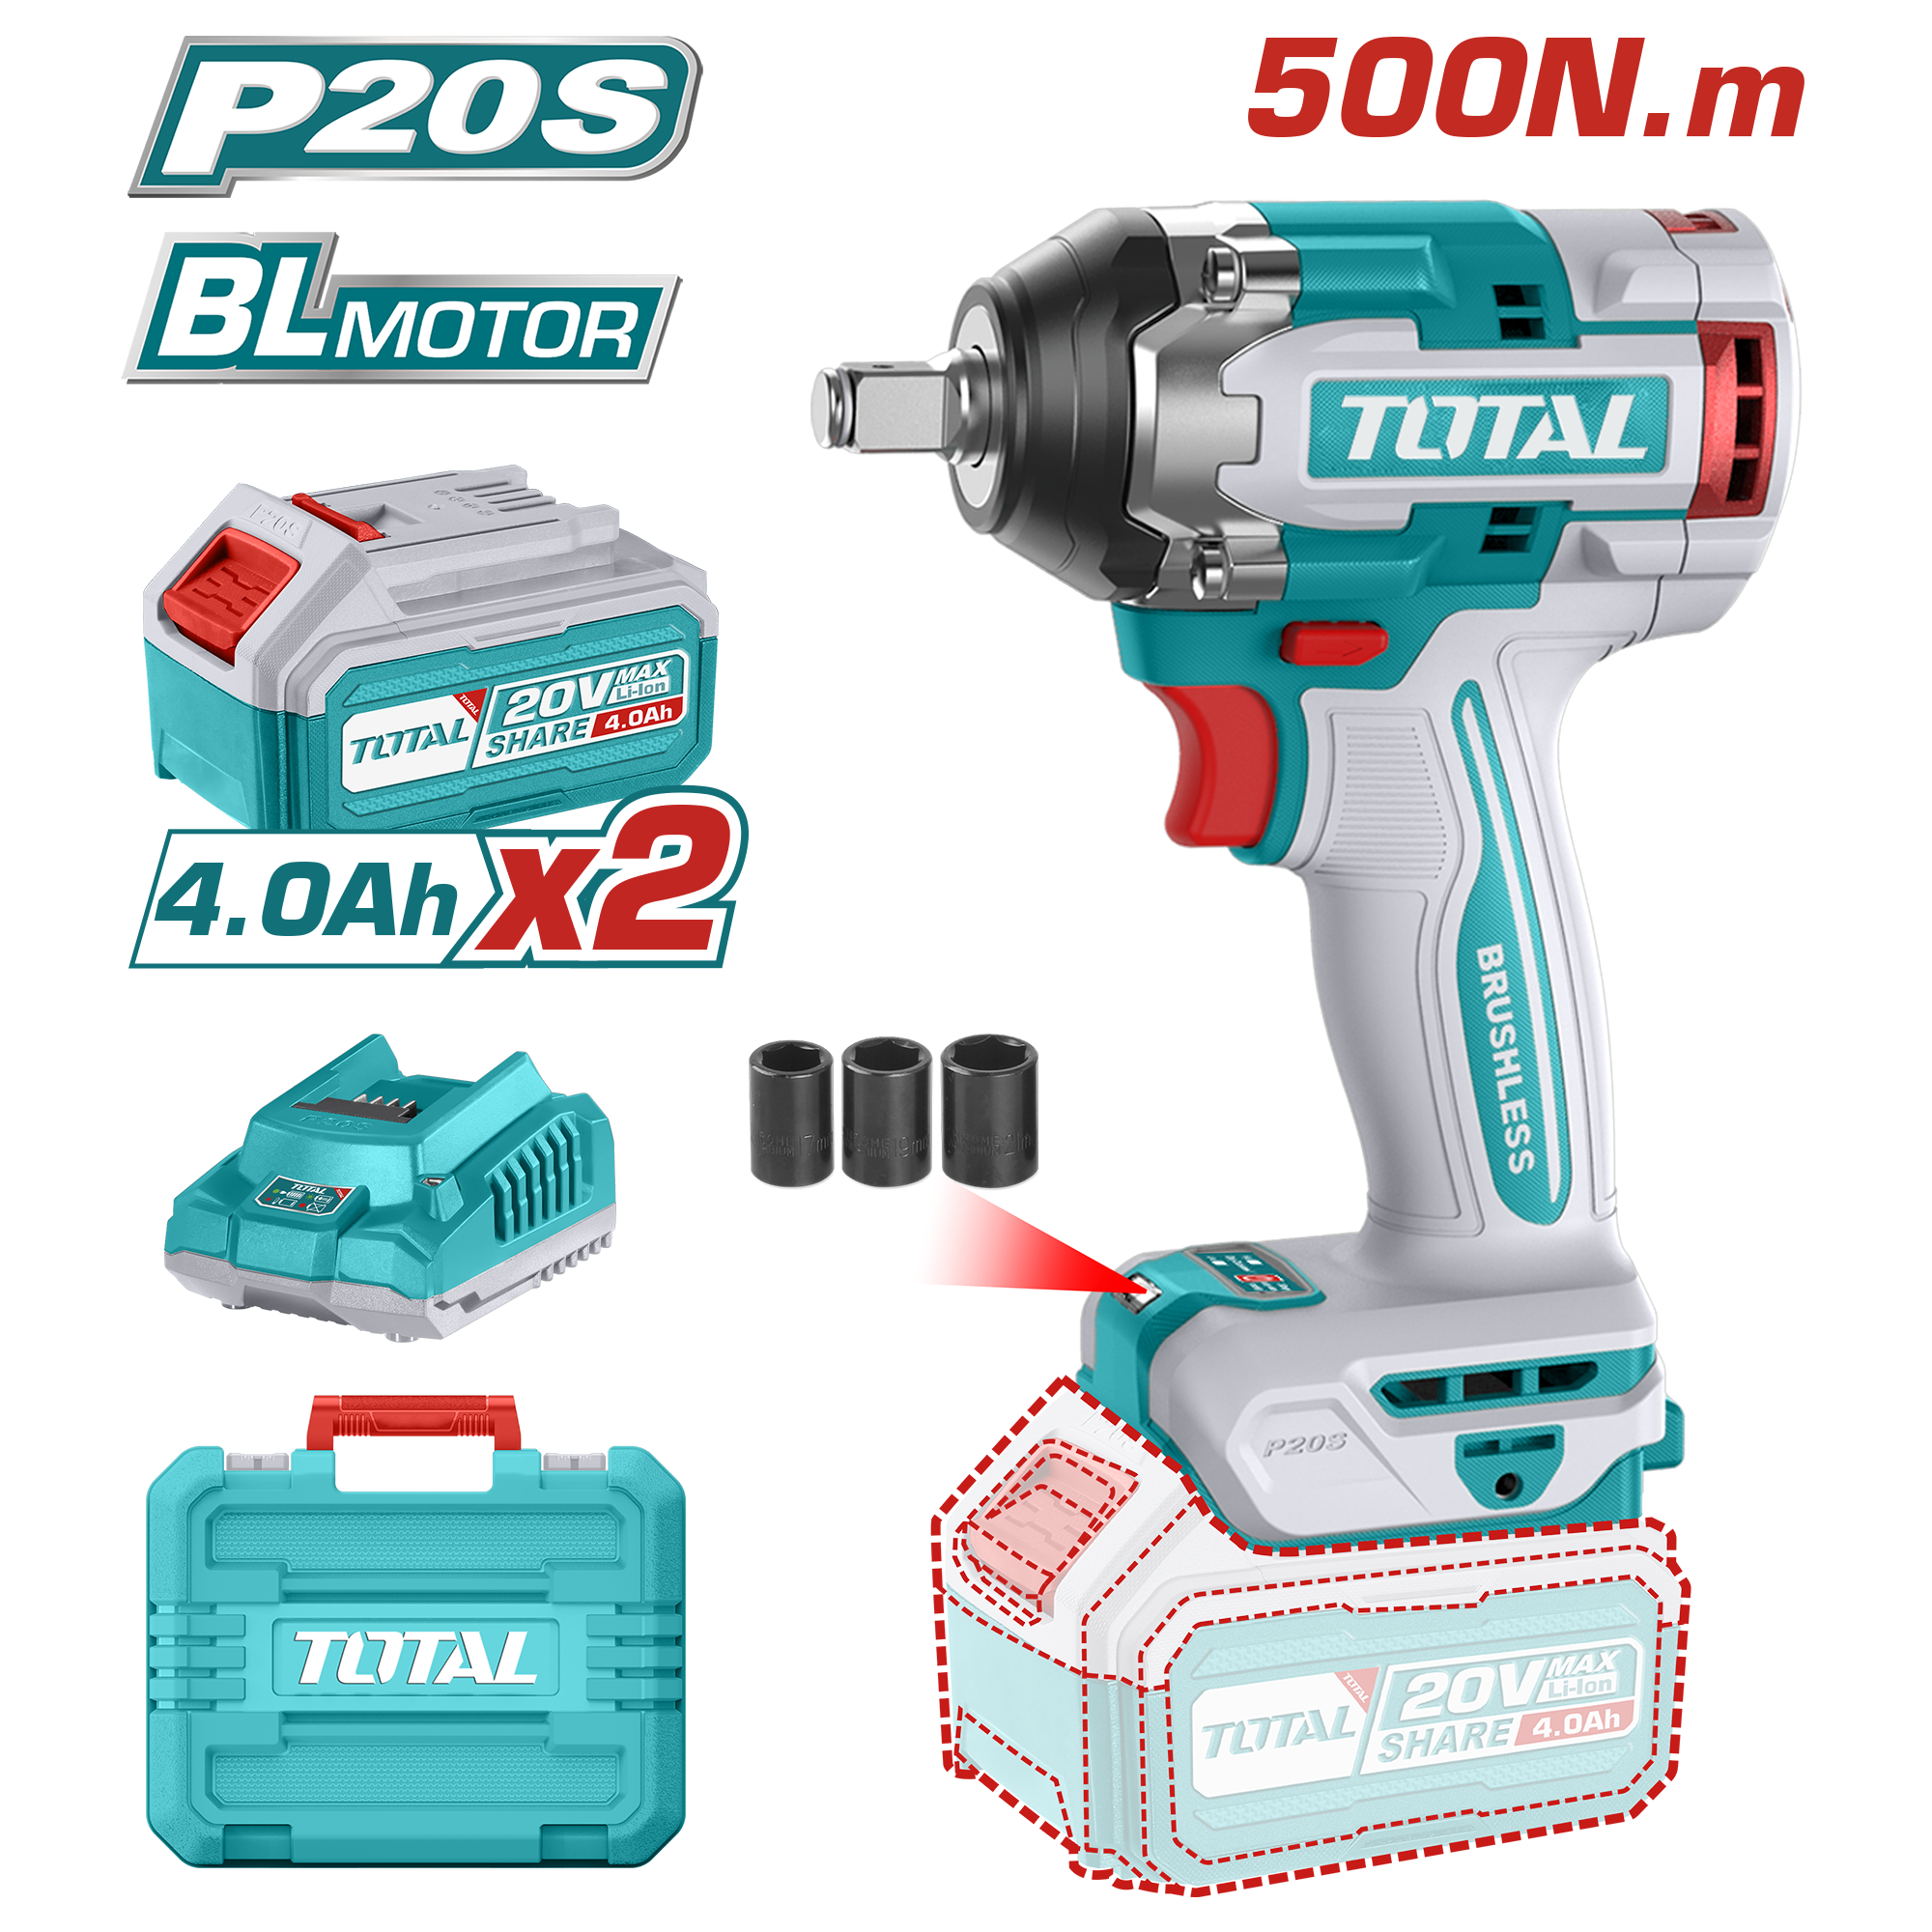 LITHIUM ION BRUSHLESS IMPACT WRENCH 1/2 INCH 500 NM WITH 2 BATTERIES 4 AMP AND CHARGER